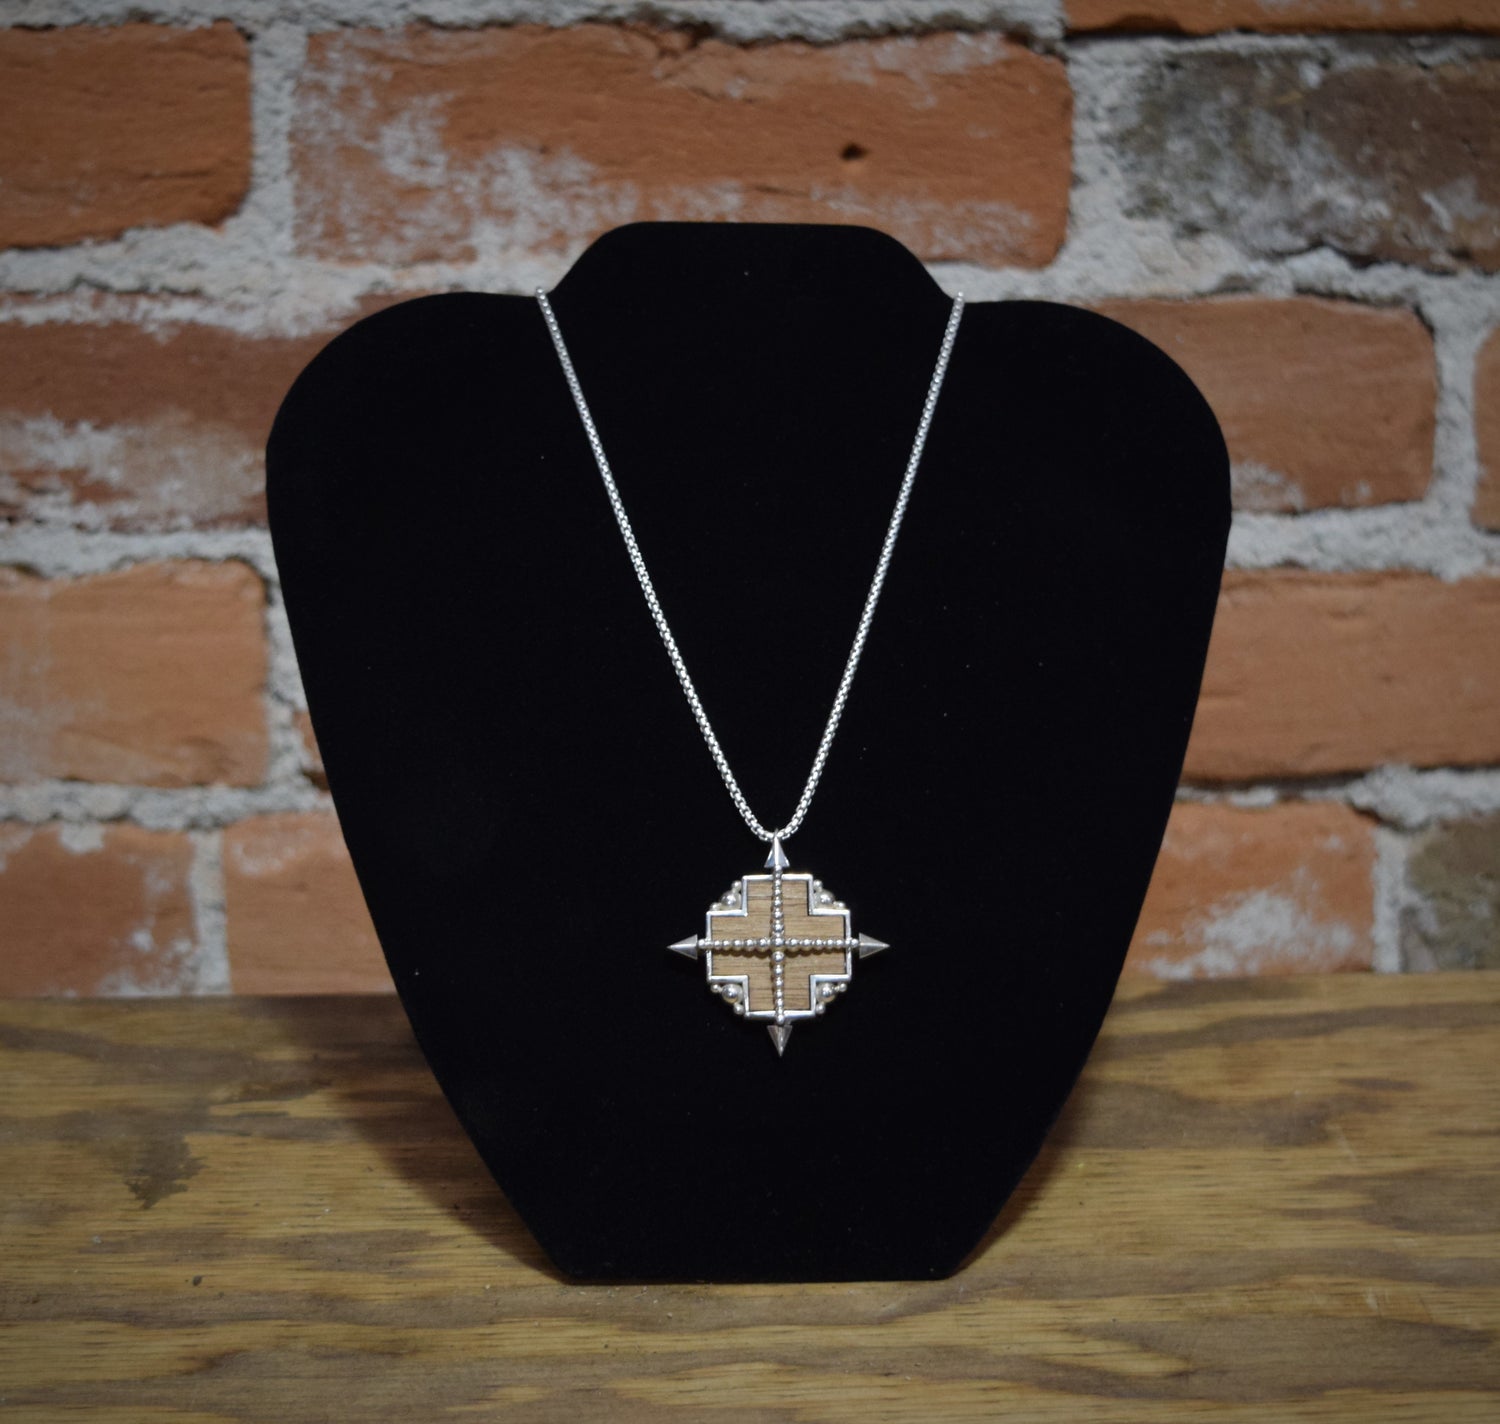 Large True North Necklace